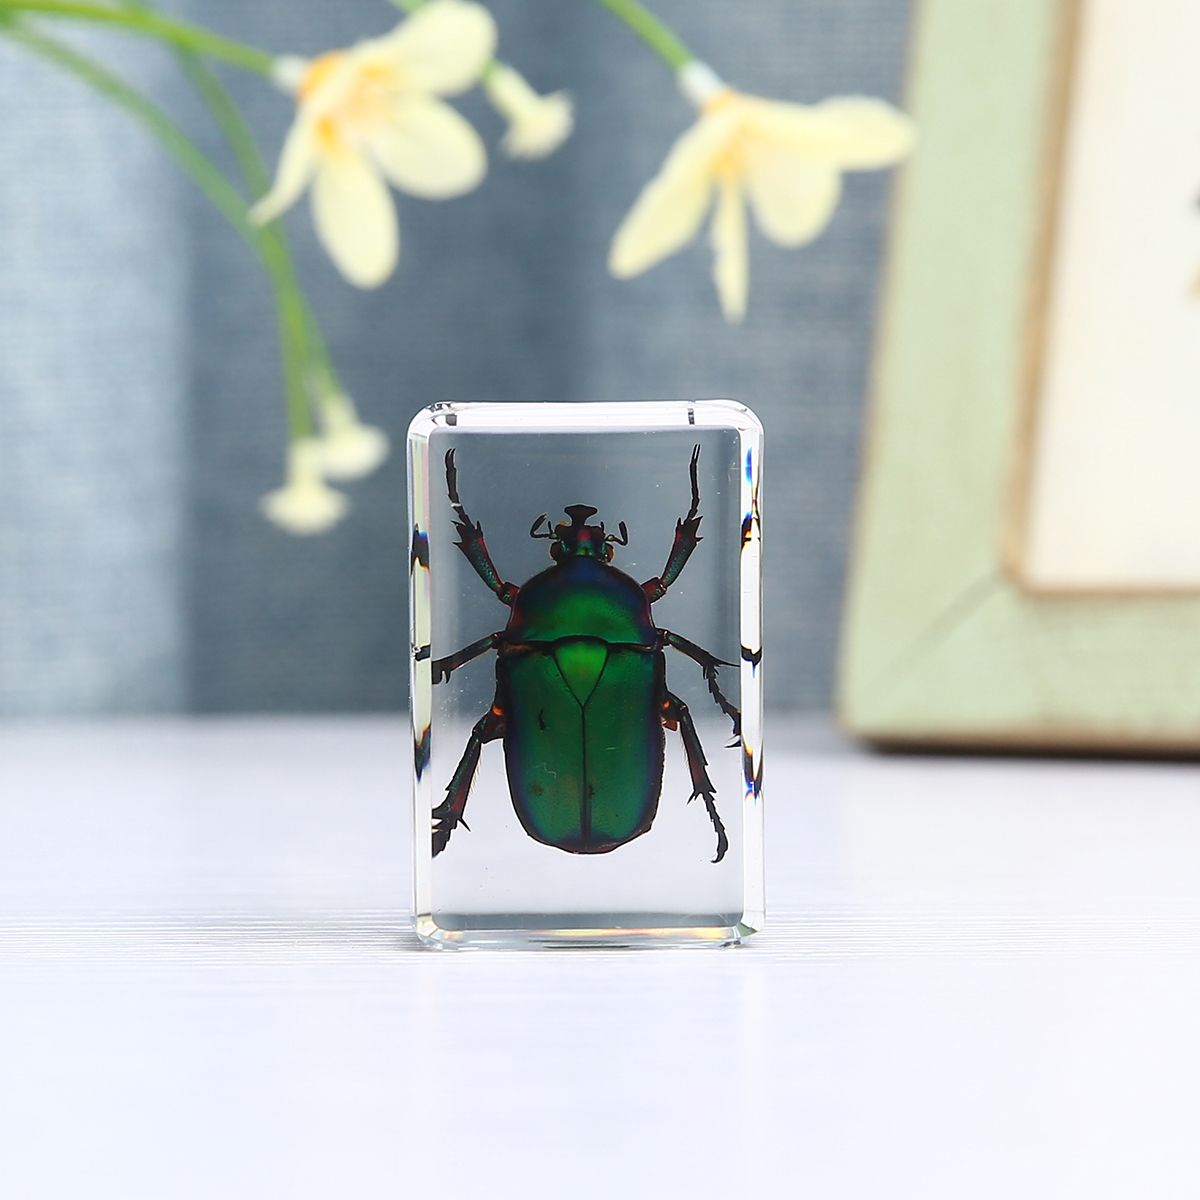 Transparent-Insect-Specimen-Rose-Chafer-Beetle-Animal-Insect-Display-Specimen-Educational-Supply-Bio-1531093